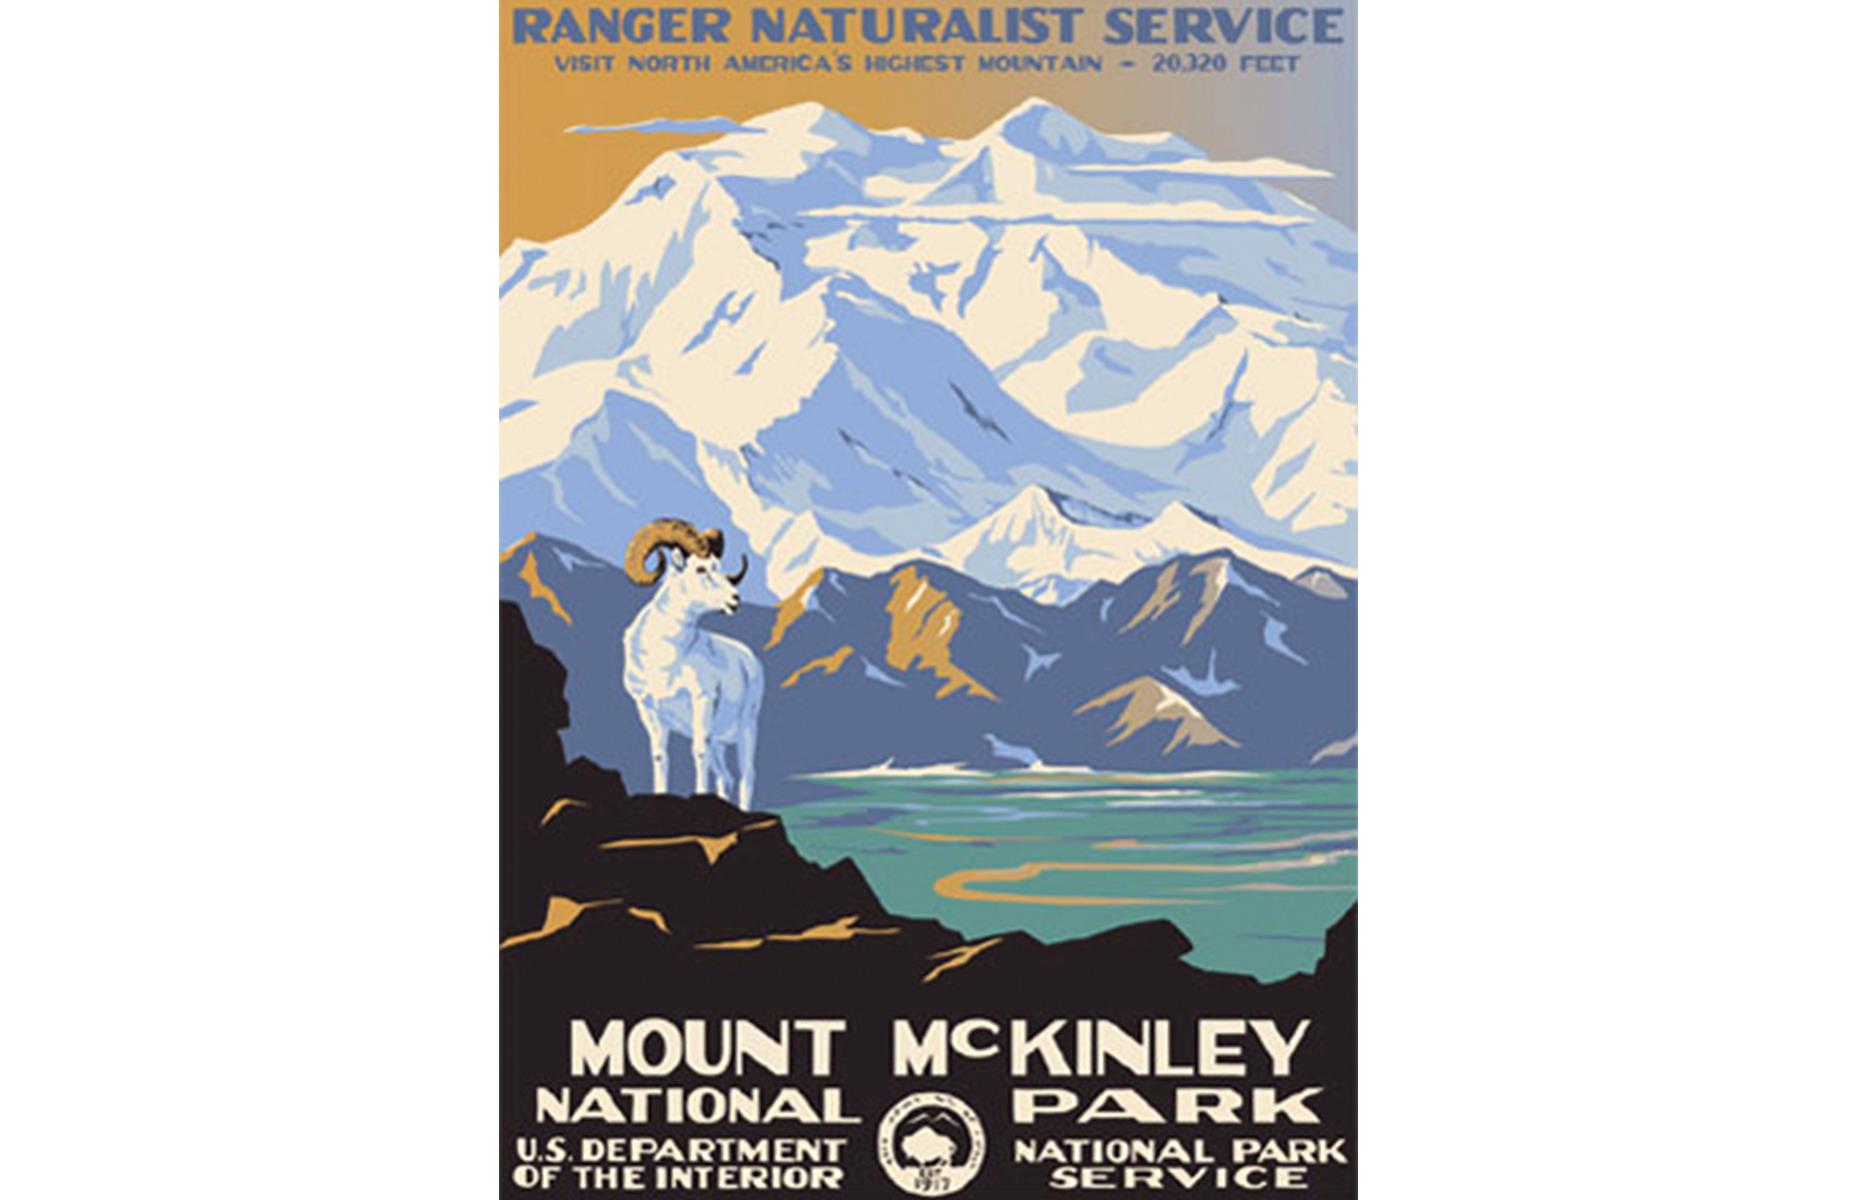 <p>Another stunning offering from the US Department of the Interior, this advert showcases Denali National Park, then known as Mount McKinley. A Dall sheep drinks in the view as the mammoth peak of Denali rises behind him. The poster invites travelers to "visit North America's highest mountain". </p>  <p><a href="https://www.loveexploring.com/galleries/101268/americas-most-beautiful-mountains?page=1"><strong>Visit more of America's beautiful mountains virtually, here</strong></a></p>